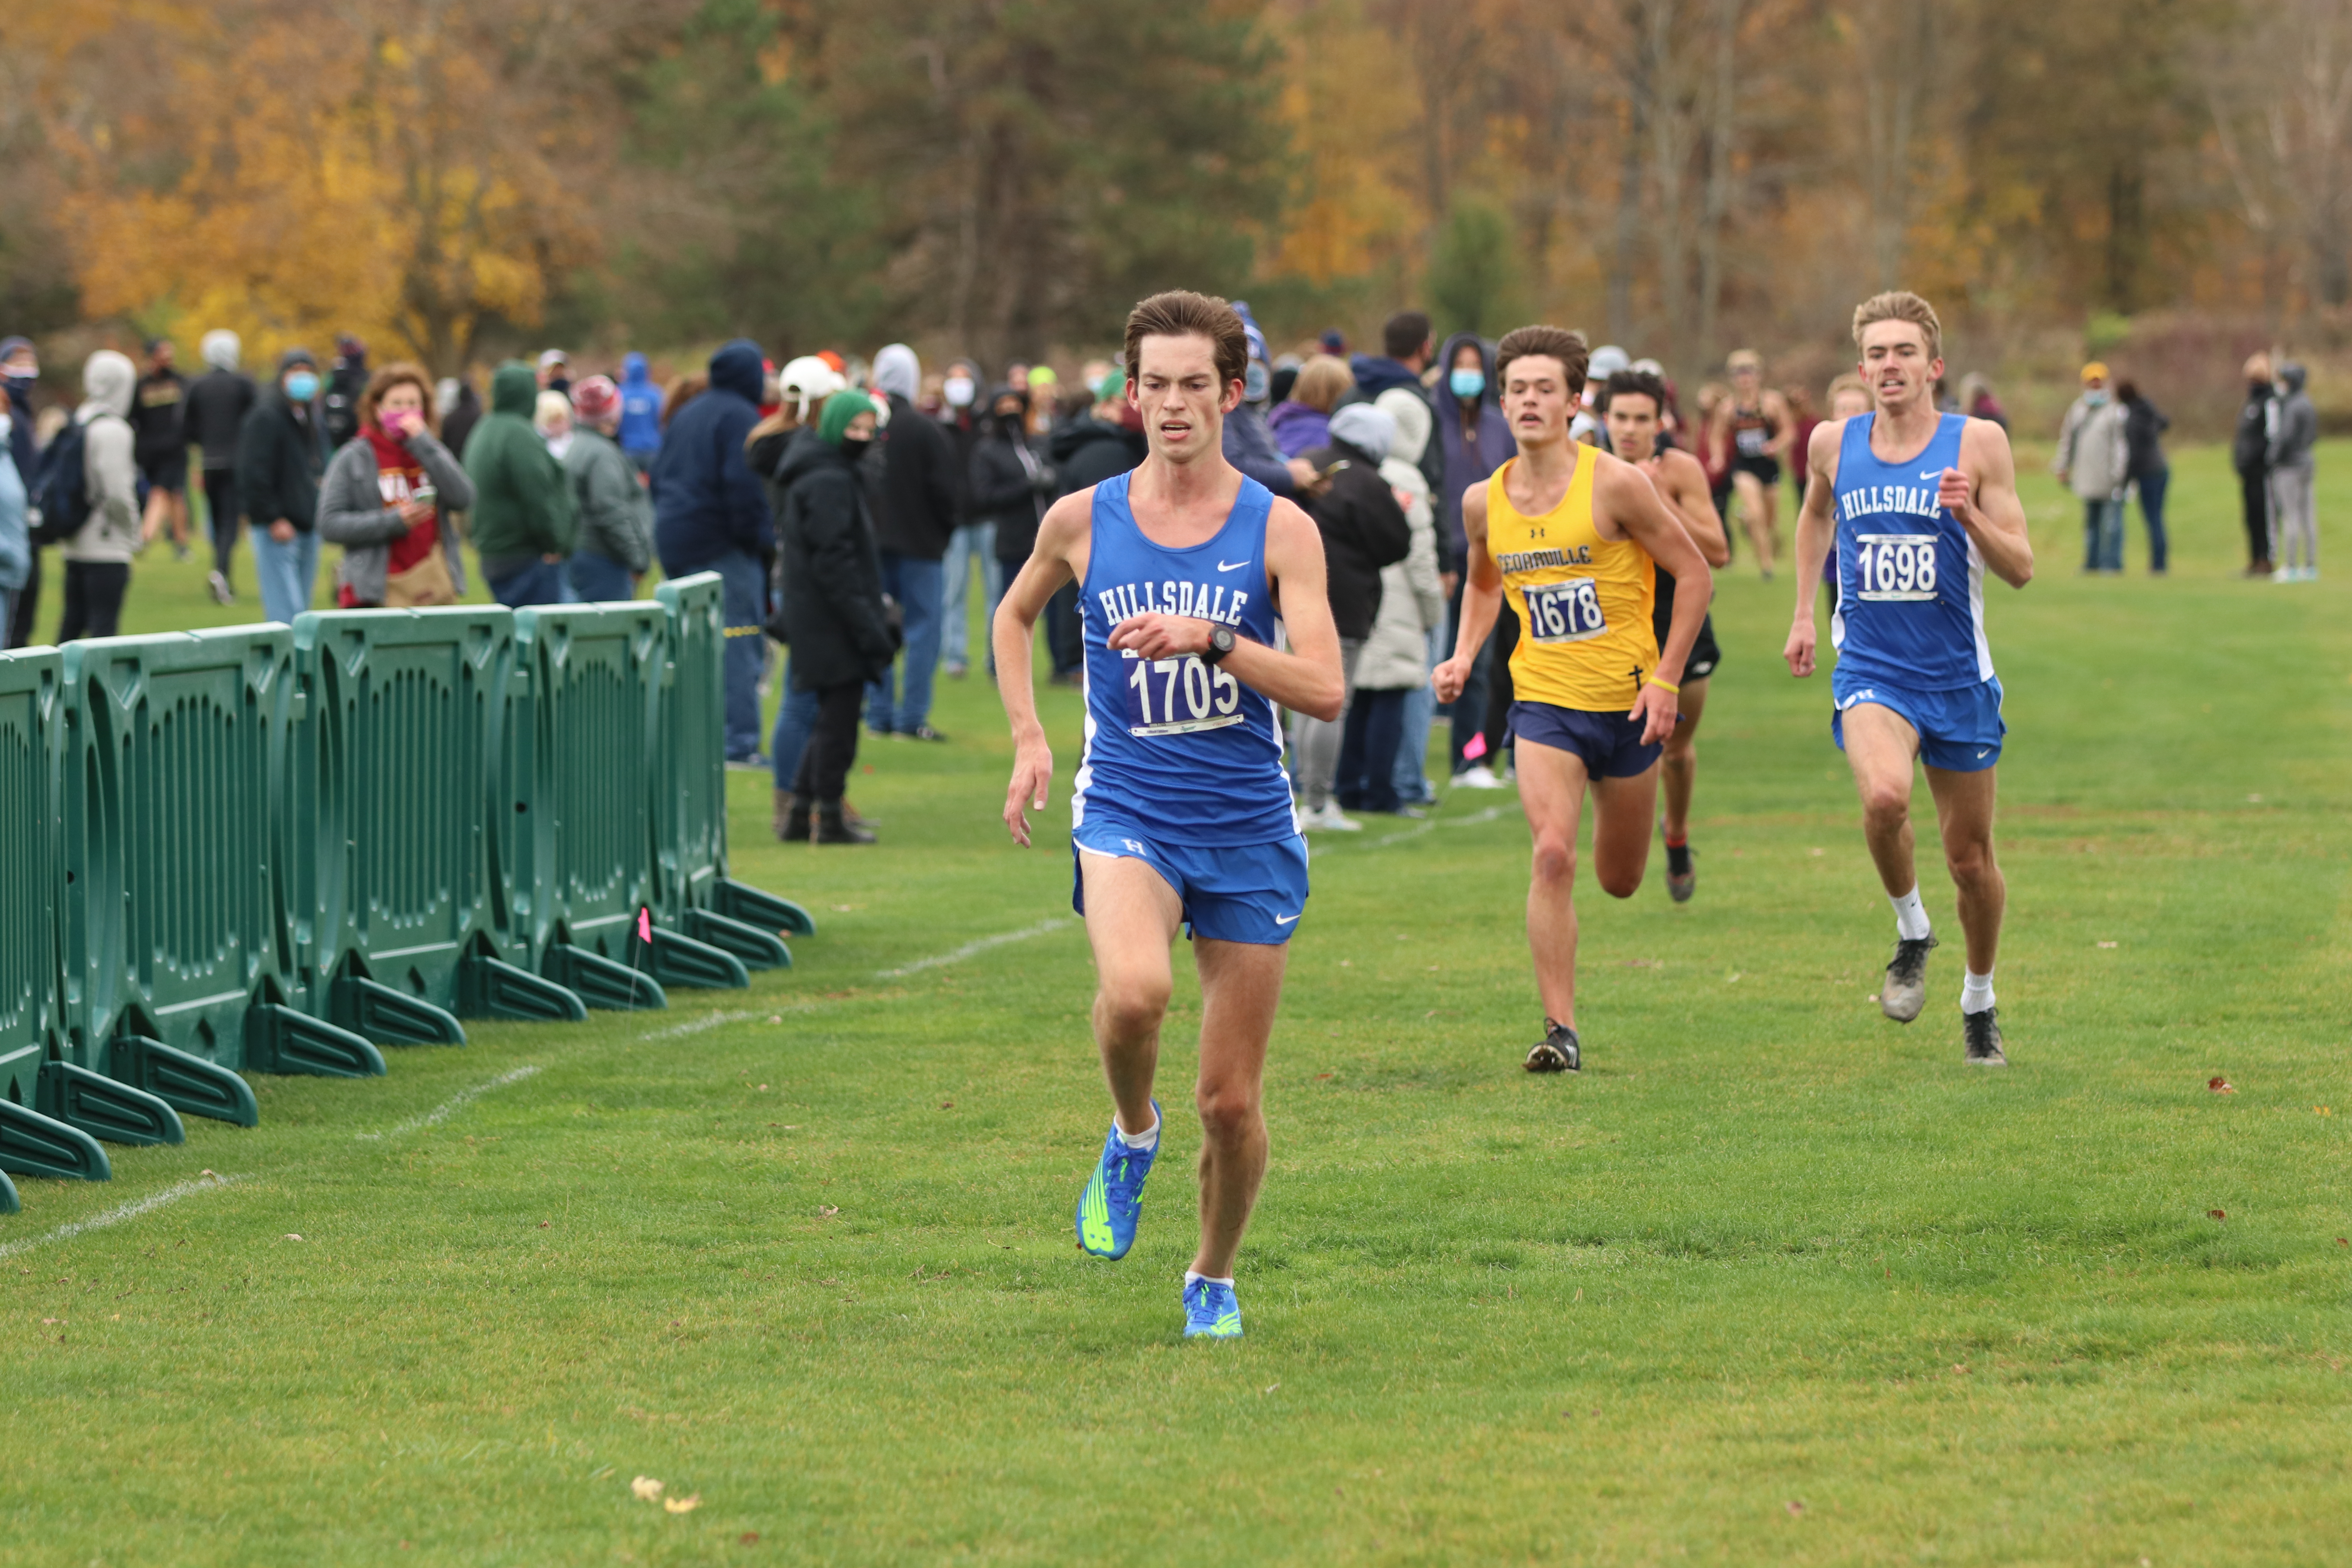 Chargers capture fourth at G-MAC Championship